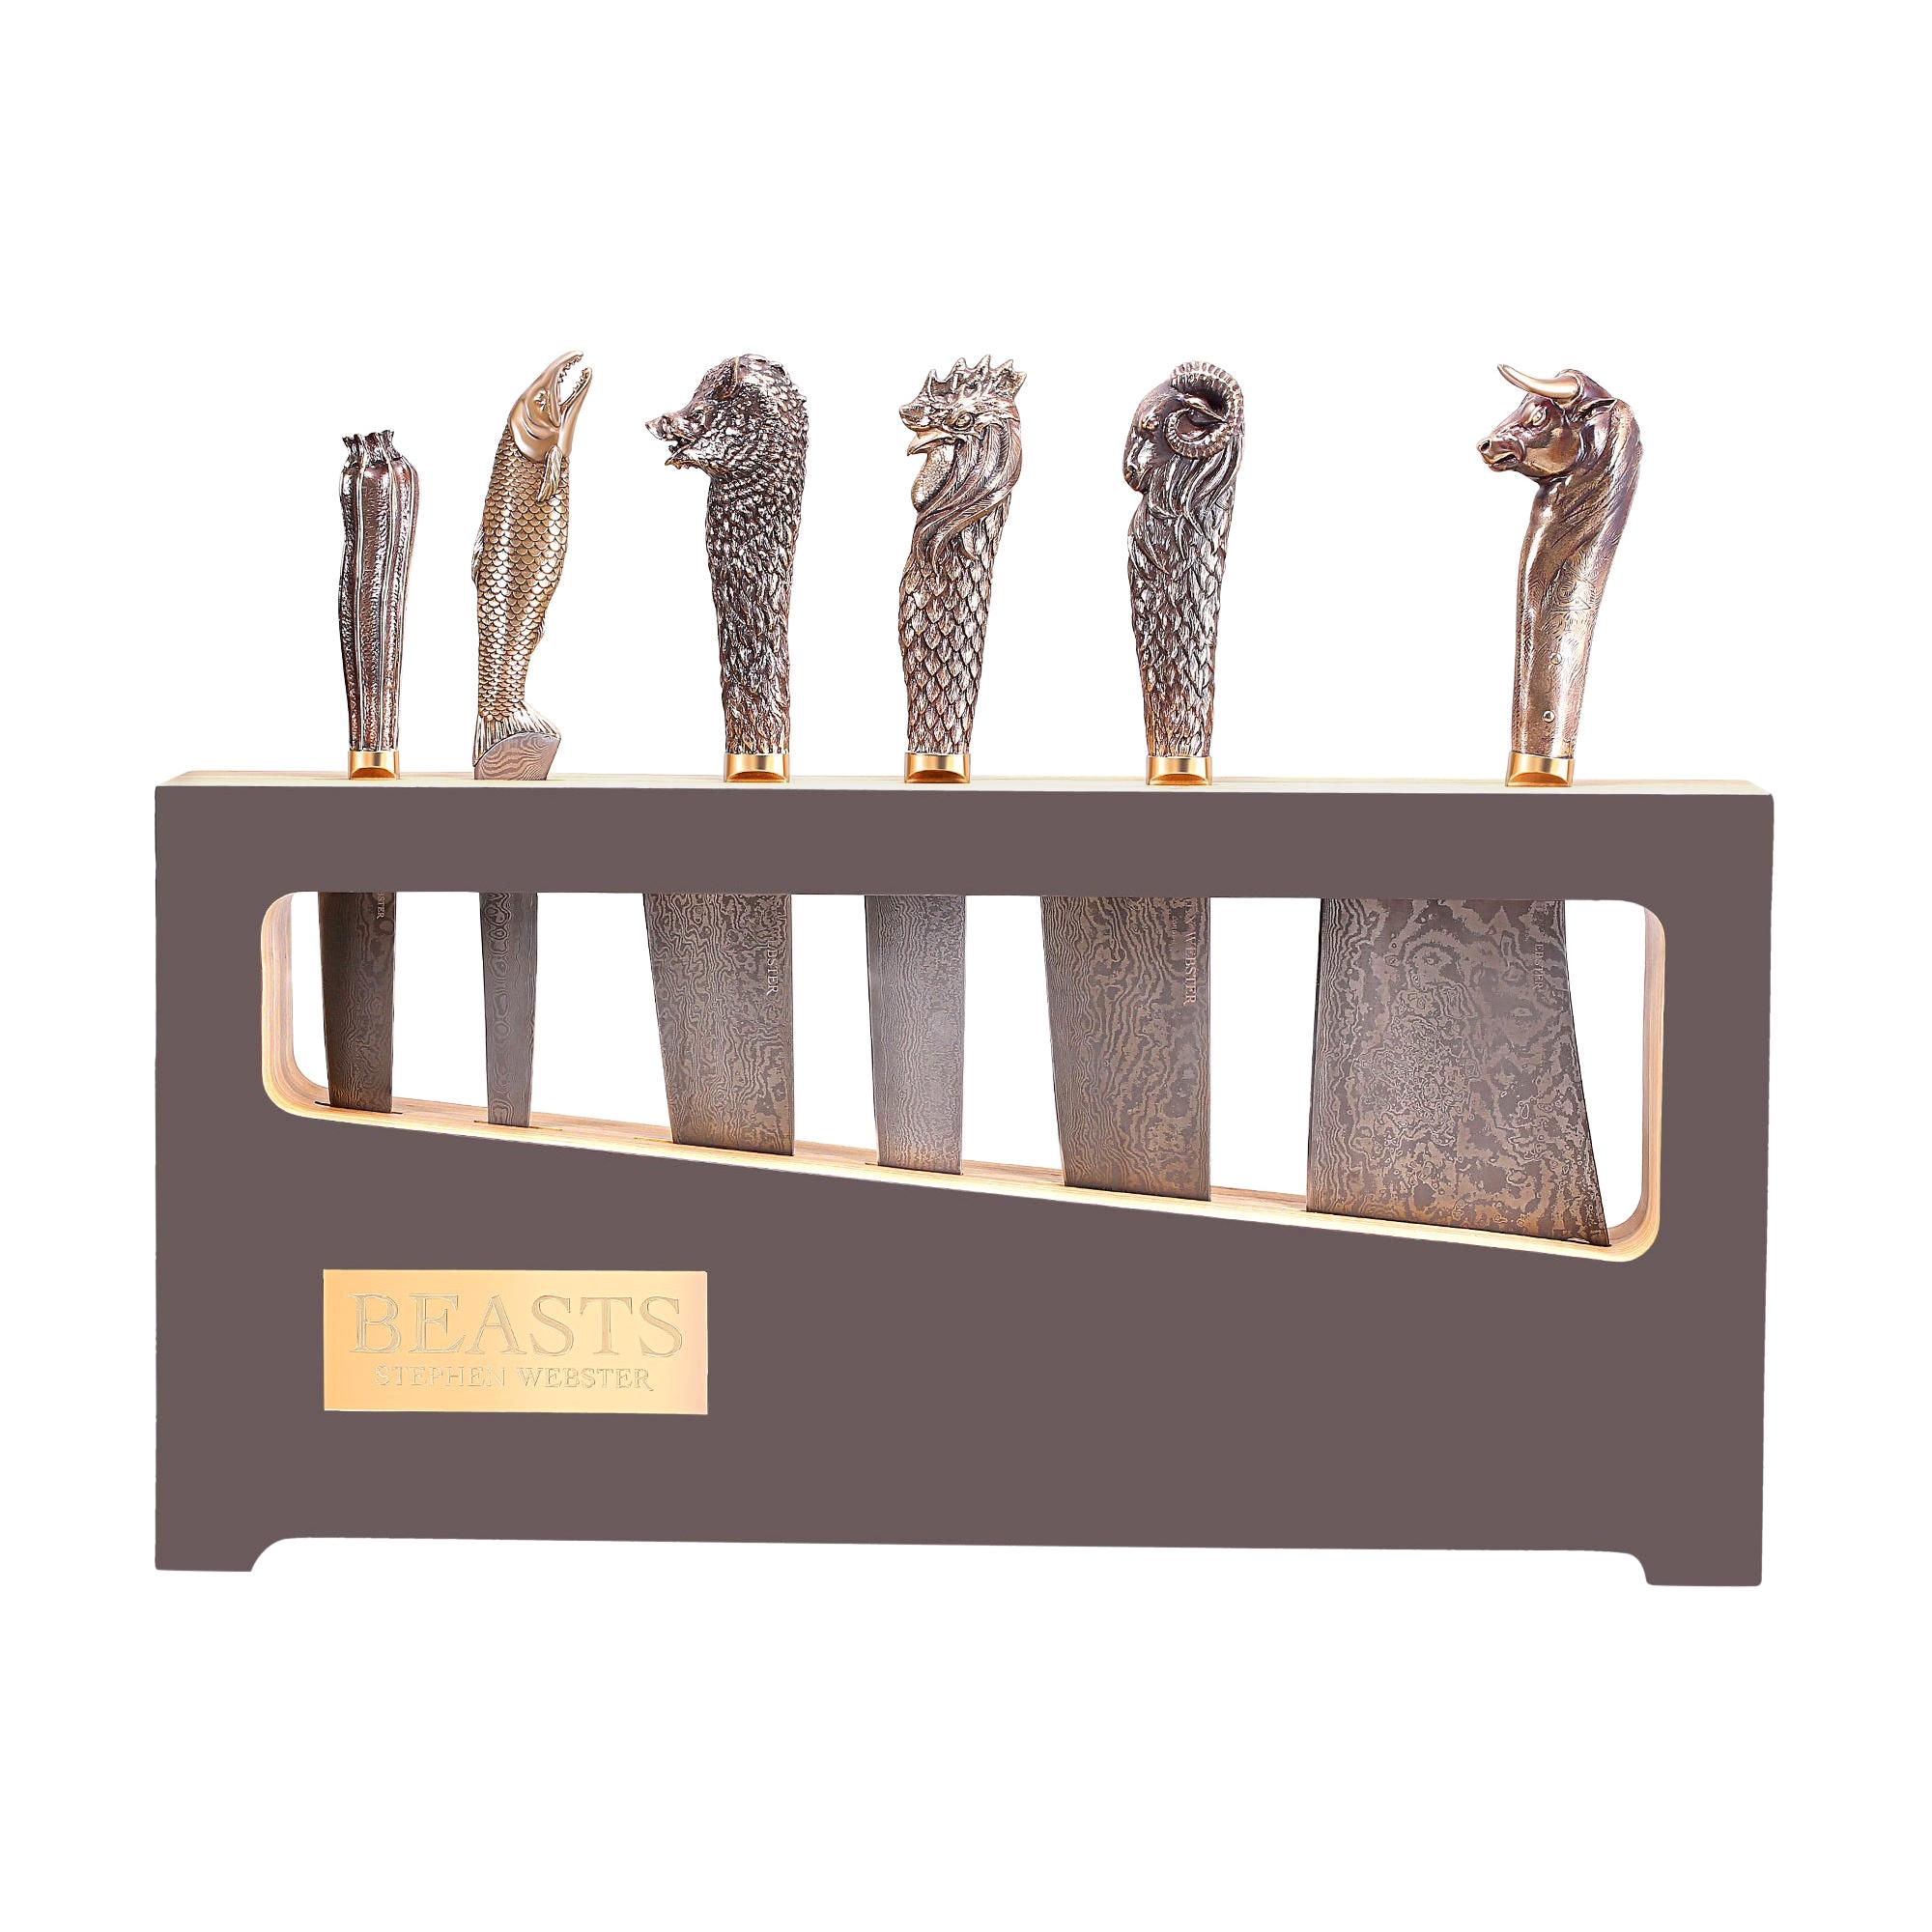 Stephen Webster Beasts Chef's Knives with Folded Steel Blades and Bronze Handles For Sale